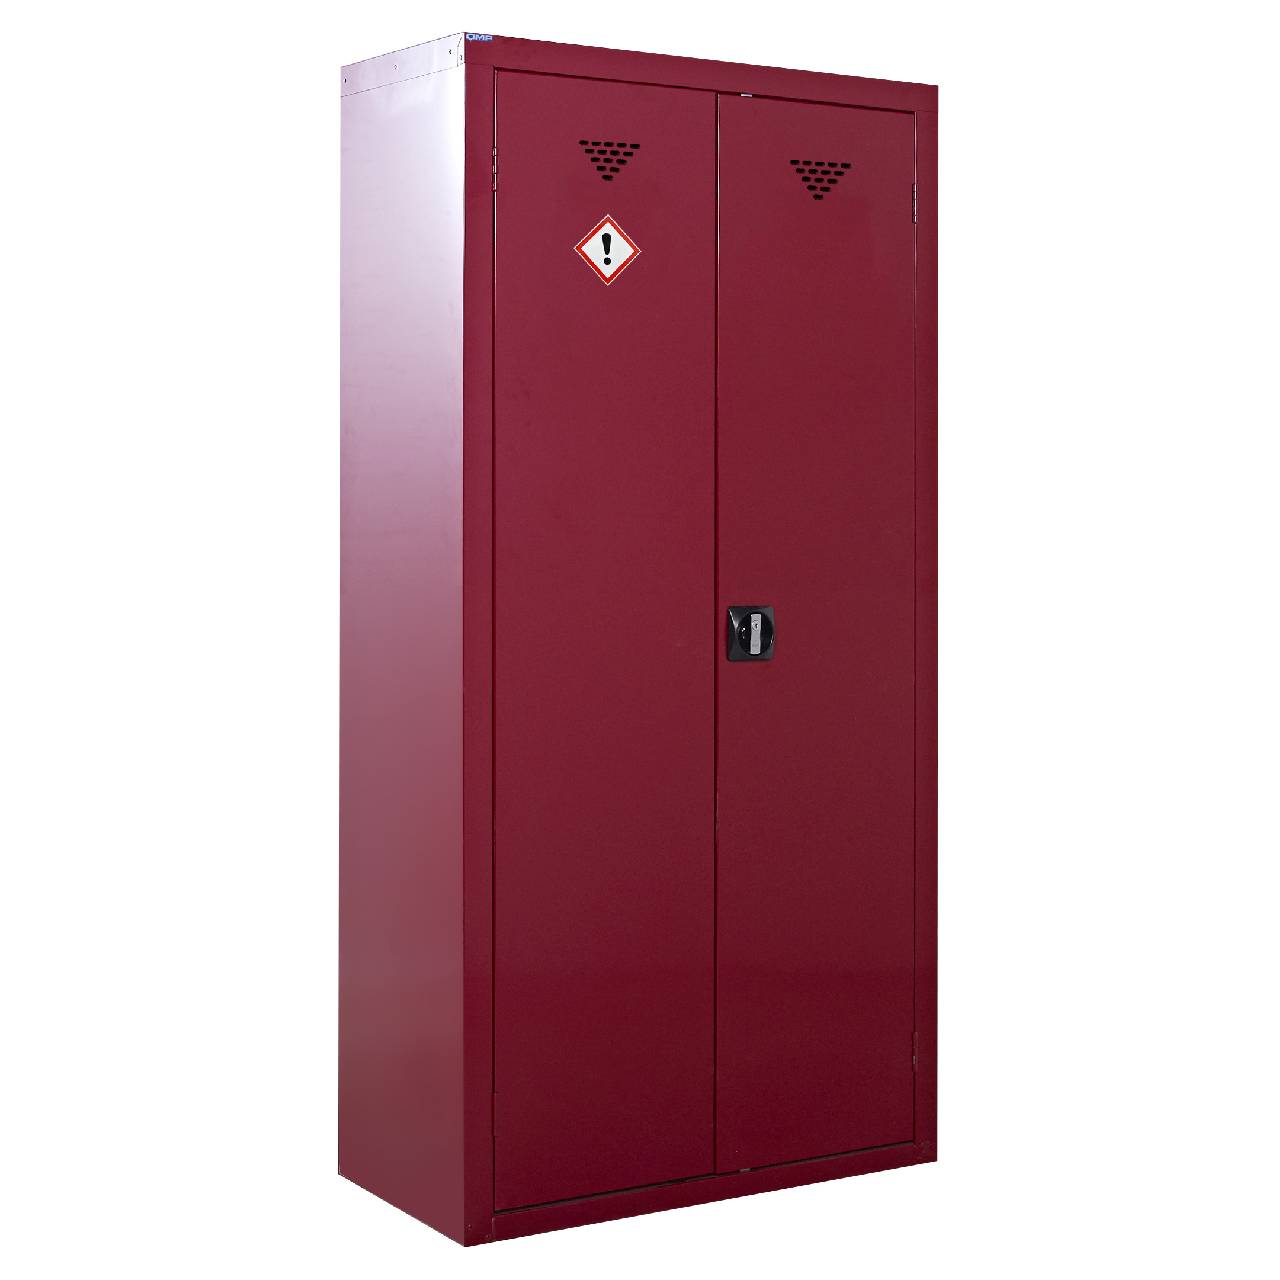 QMP Pesticide & Agrochemical Floor Standing Cabinets - 1800H x 900W x 460D mm